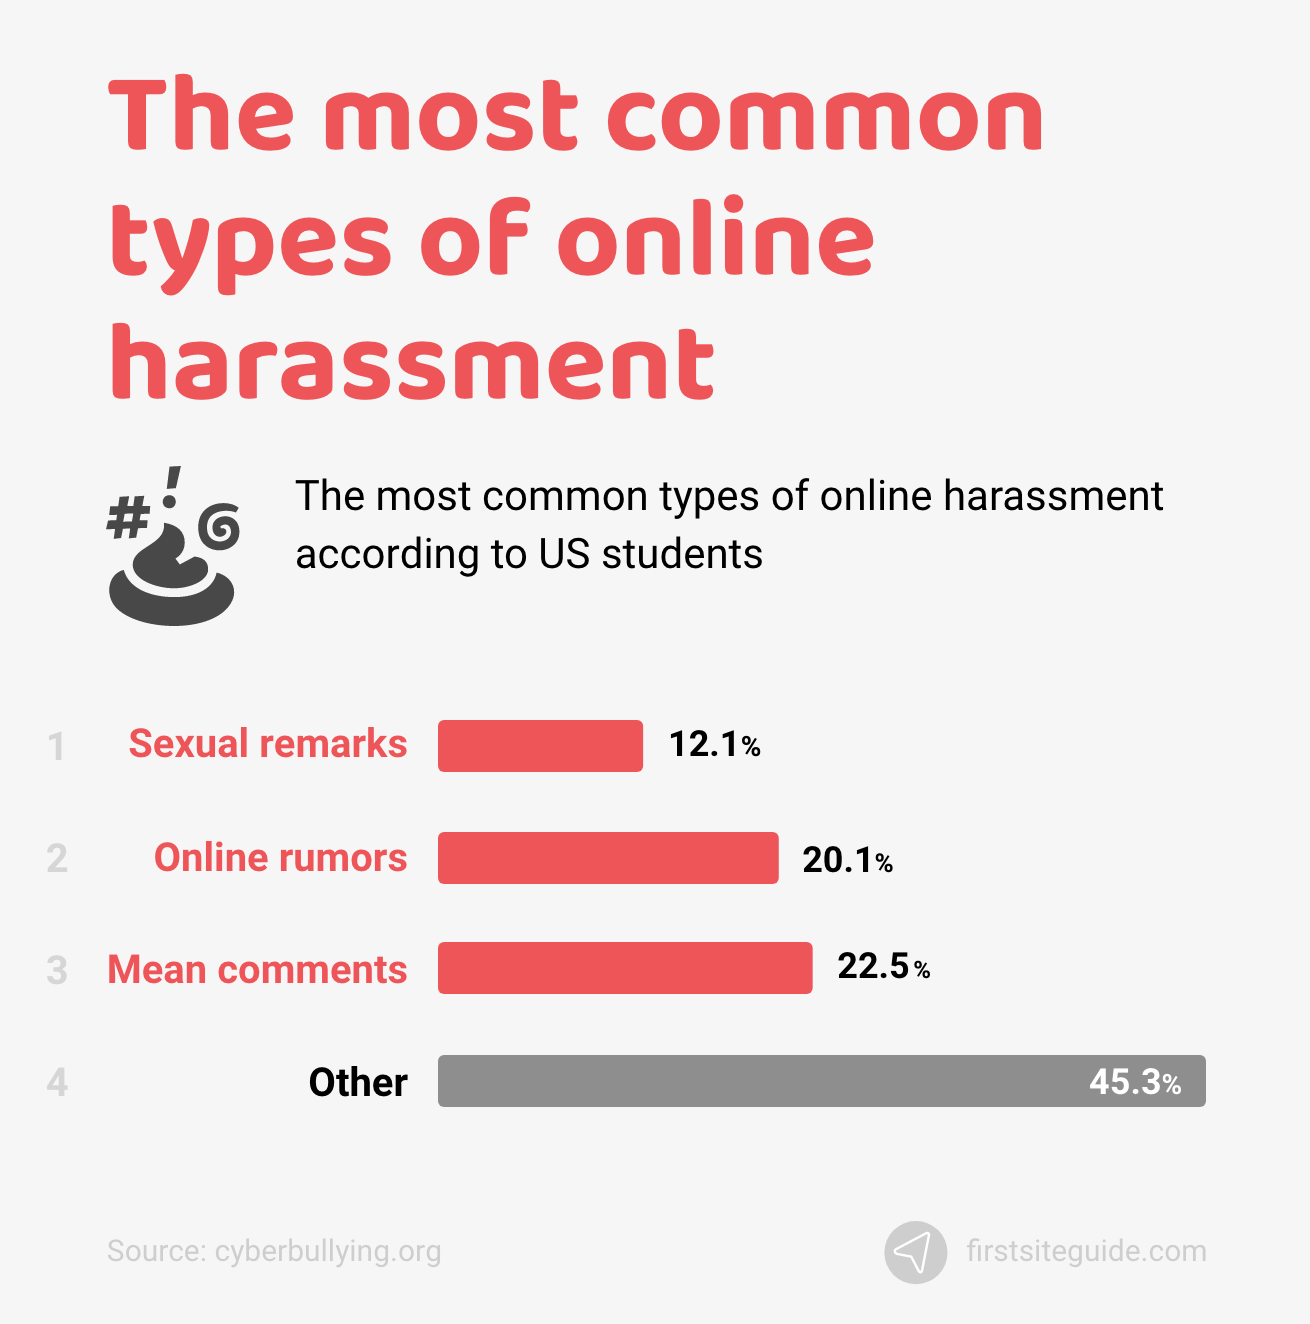 The most common types of online harassment